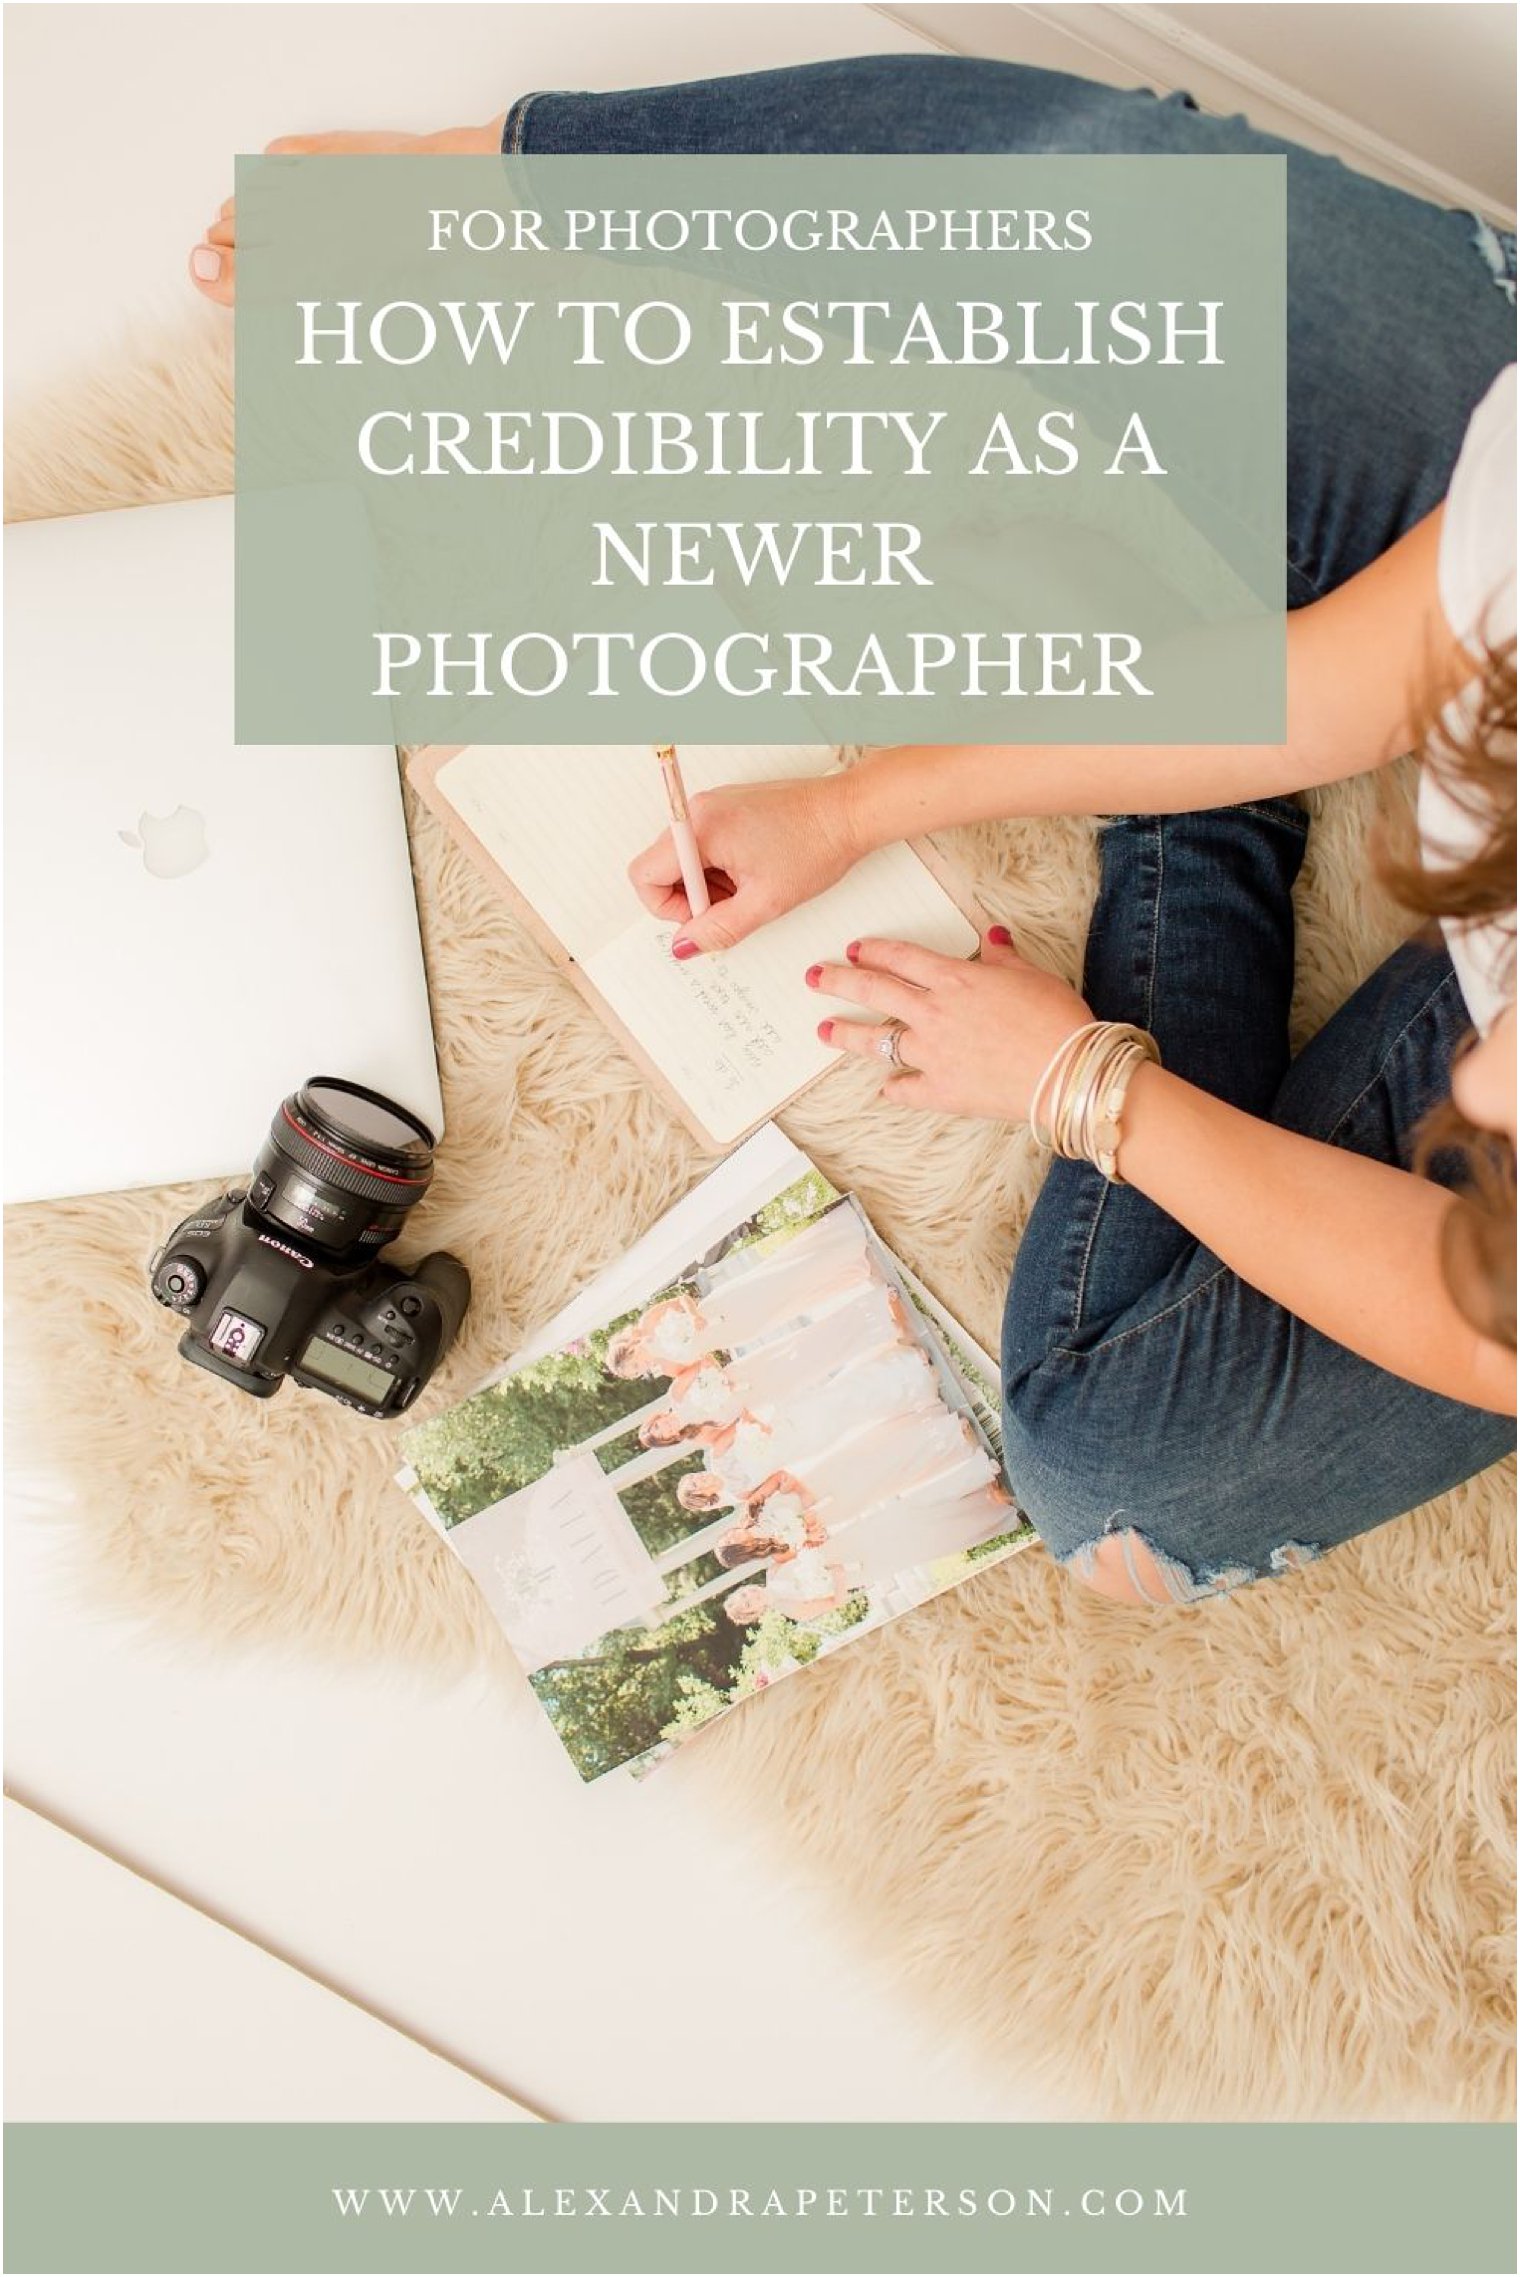 How to Establish Credibility as a Newer Photographer